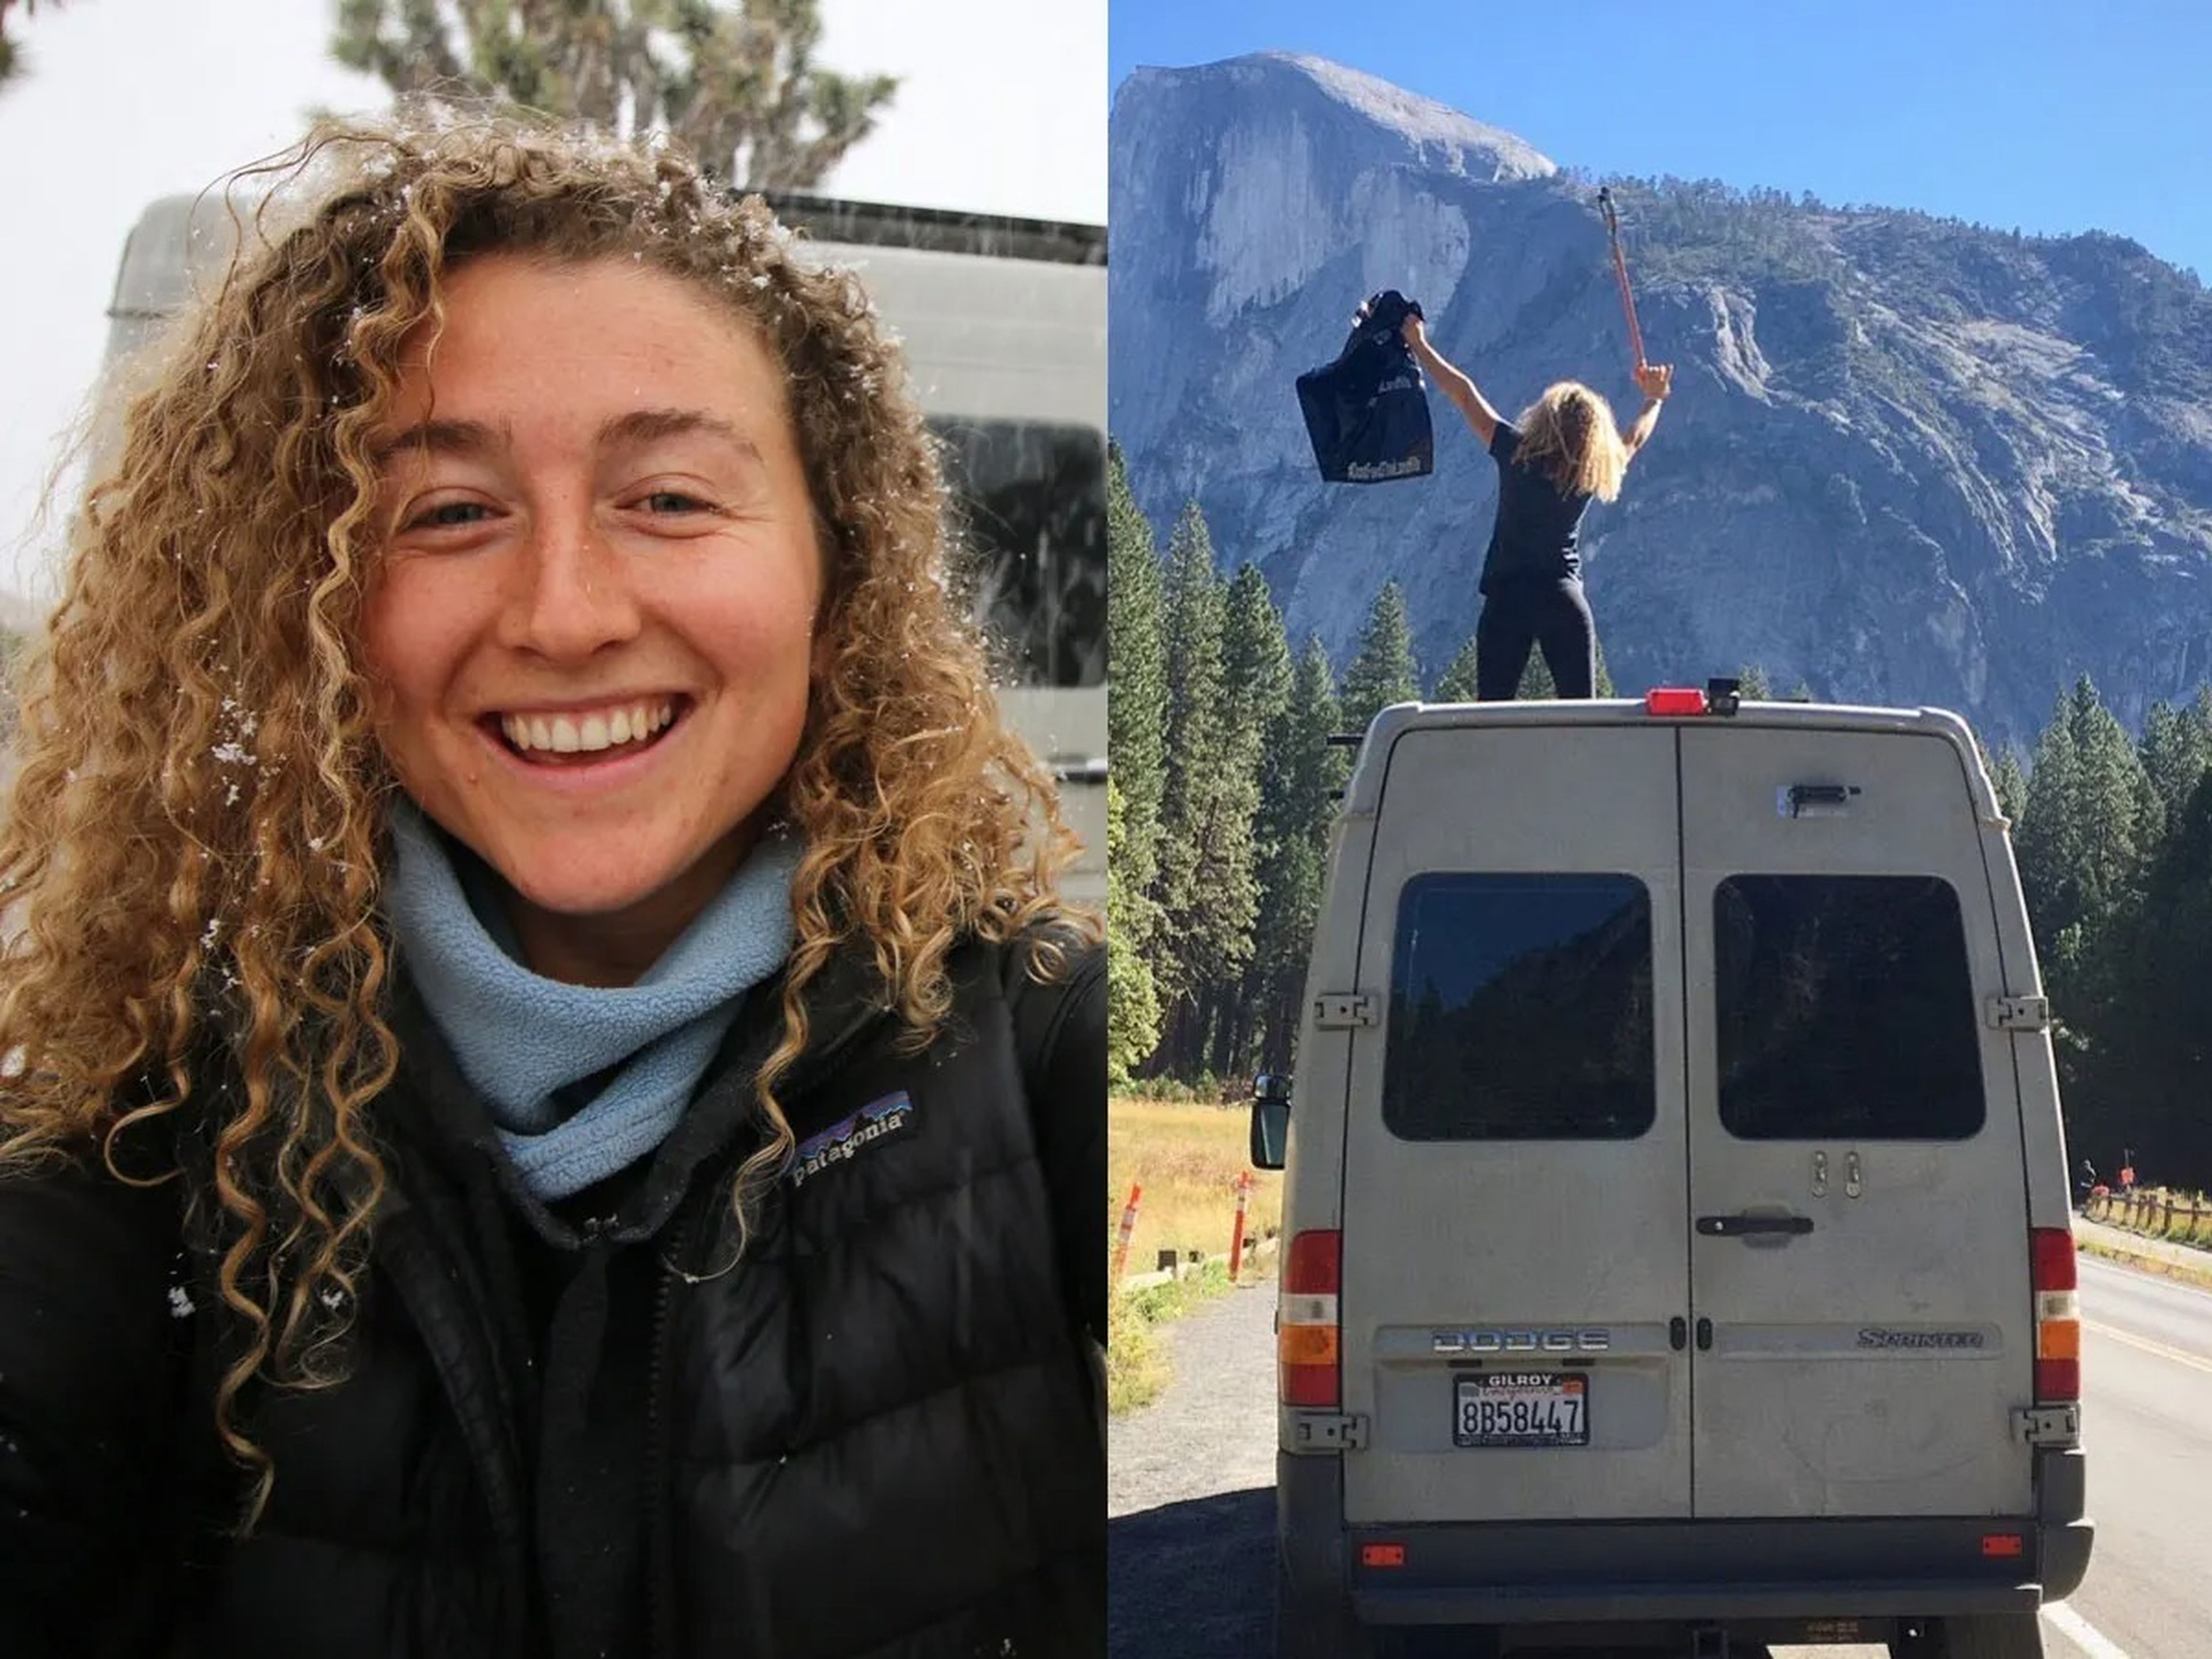 Kaya Lindsay smiling selfie on the left, Kaya Lindsay standing on top of van with mountain in background right